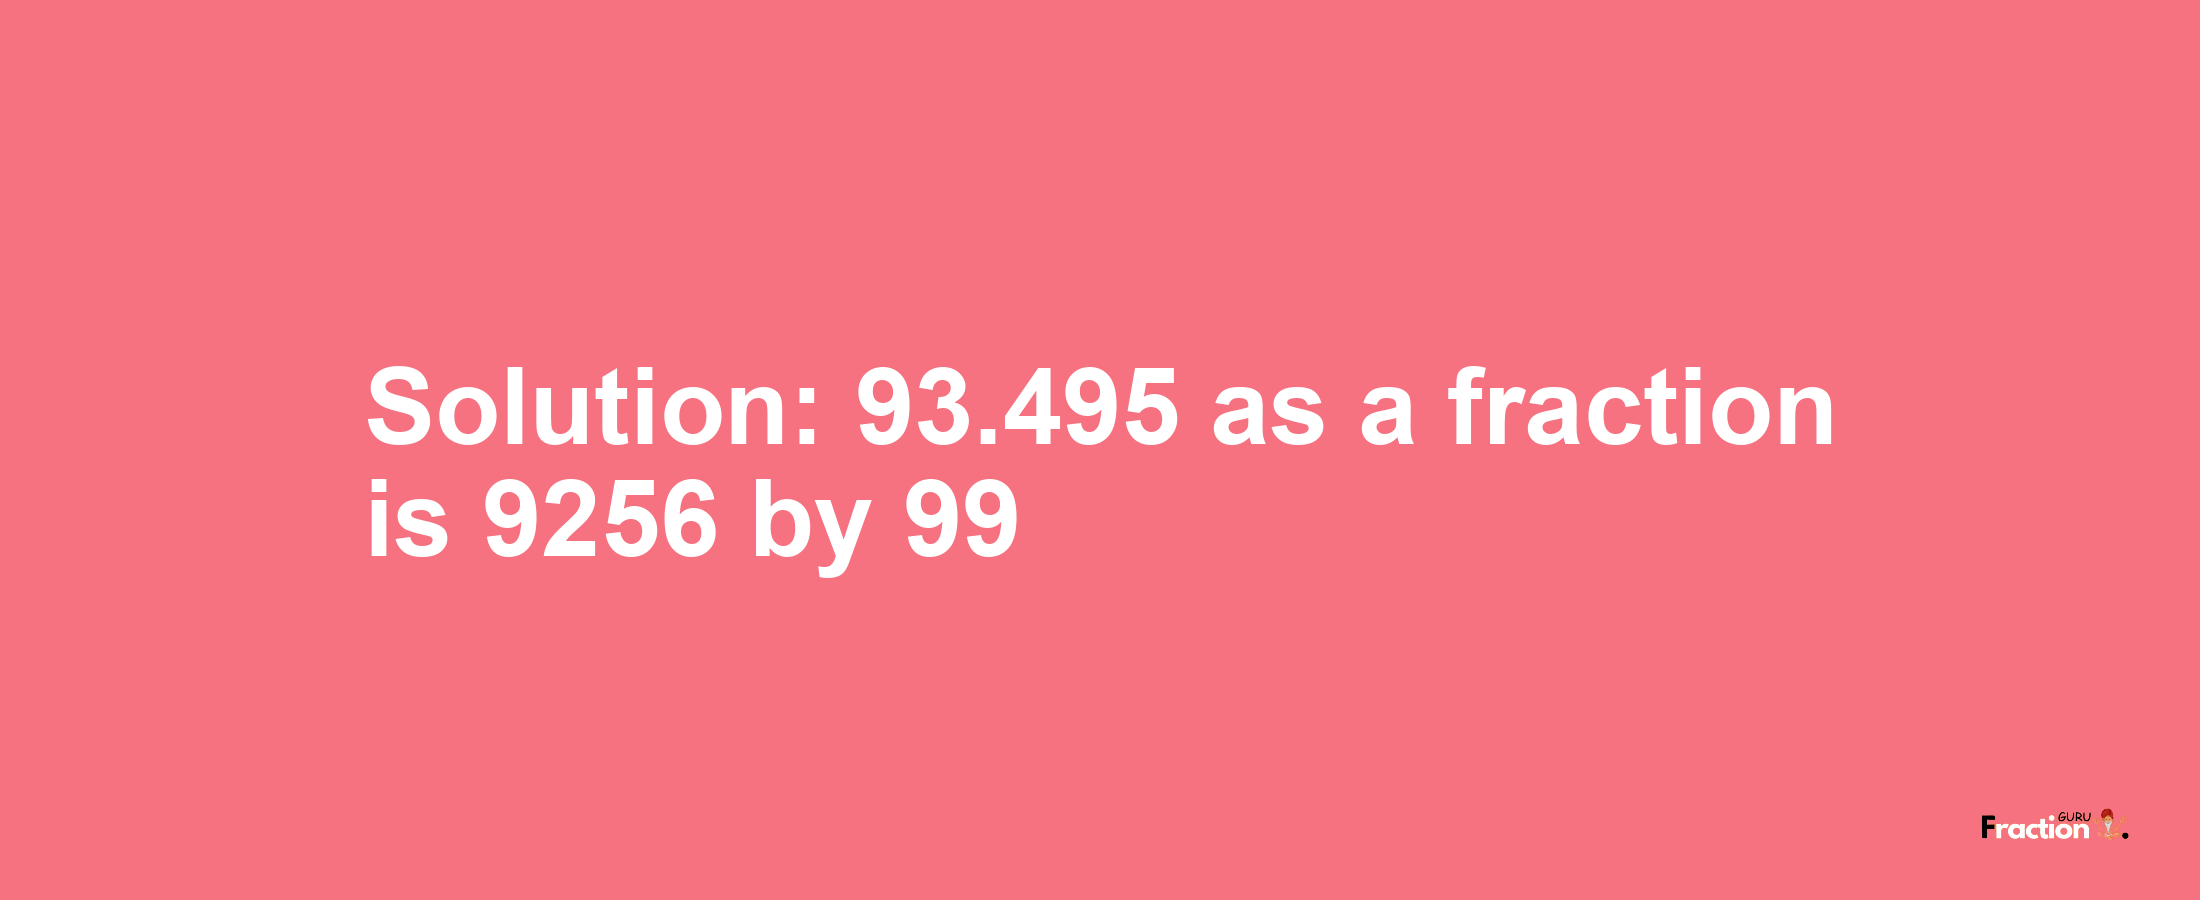 Solution:93.495 as a fraction is 9256/99